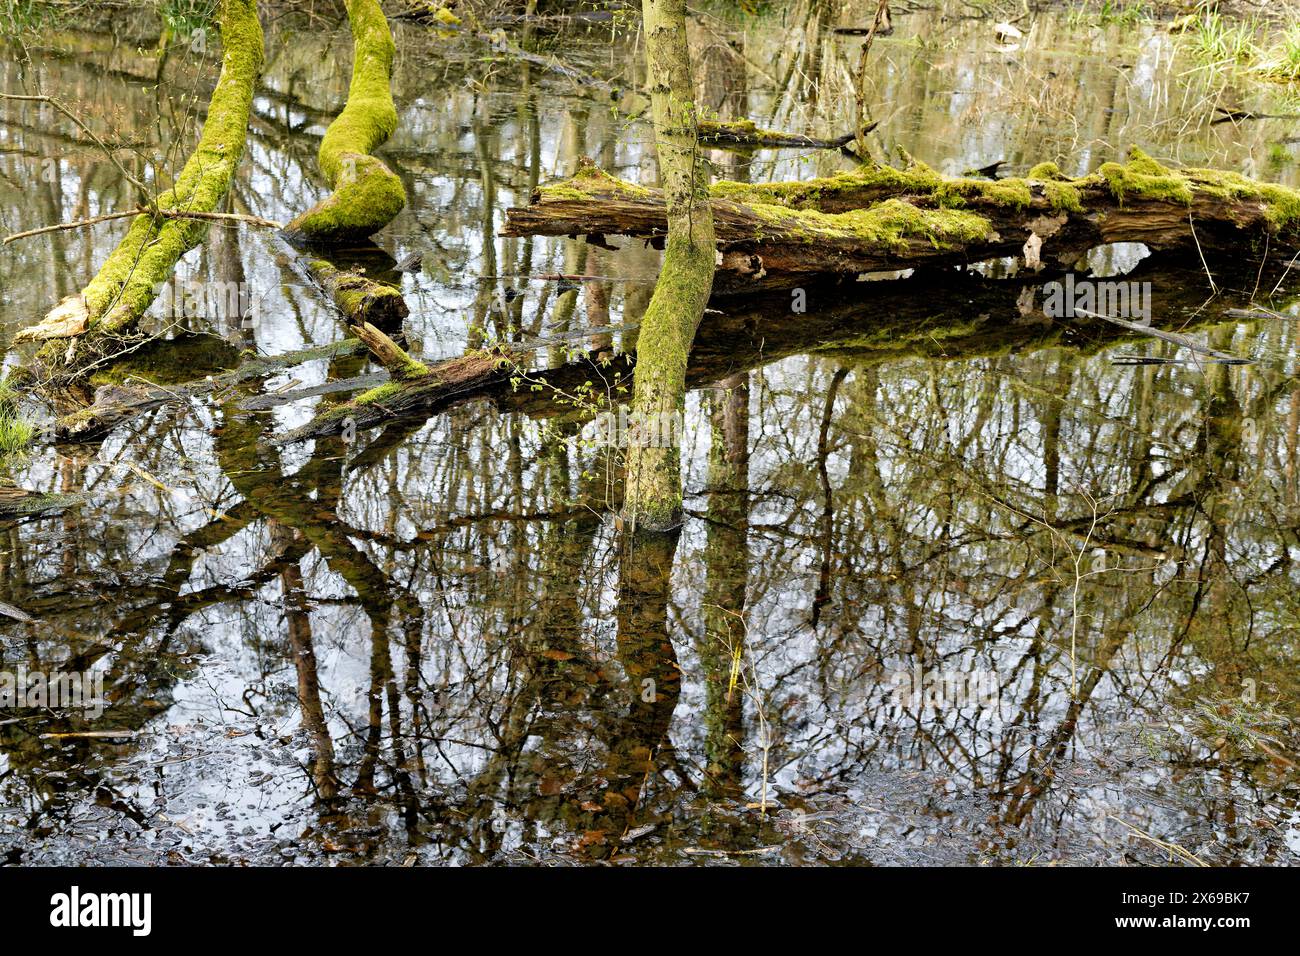 Europe, Germany, North Rhine-Westphalia, Bonn, city, Bonn, Ippendorf, Kottenforst, Waldau, forest, nature reserve, forest reserve, swampy terrain, water, beech, pine, tree, tree stump, moss-covered trunk, lying in water, dead, deadwood, weathered, atmosphere, mystical, spring, beginning green, slightly cloudy, daylight, Stock Photo